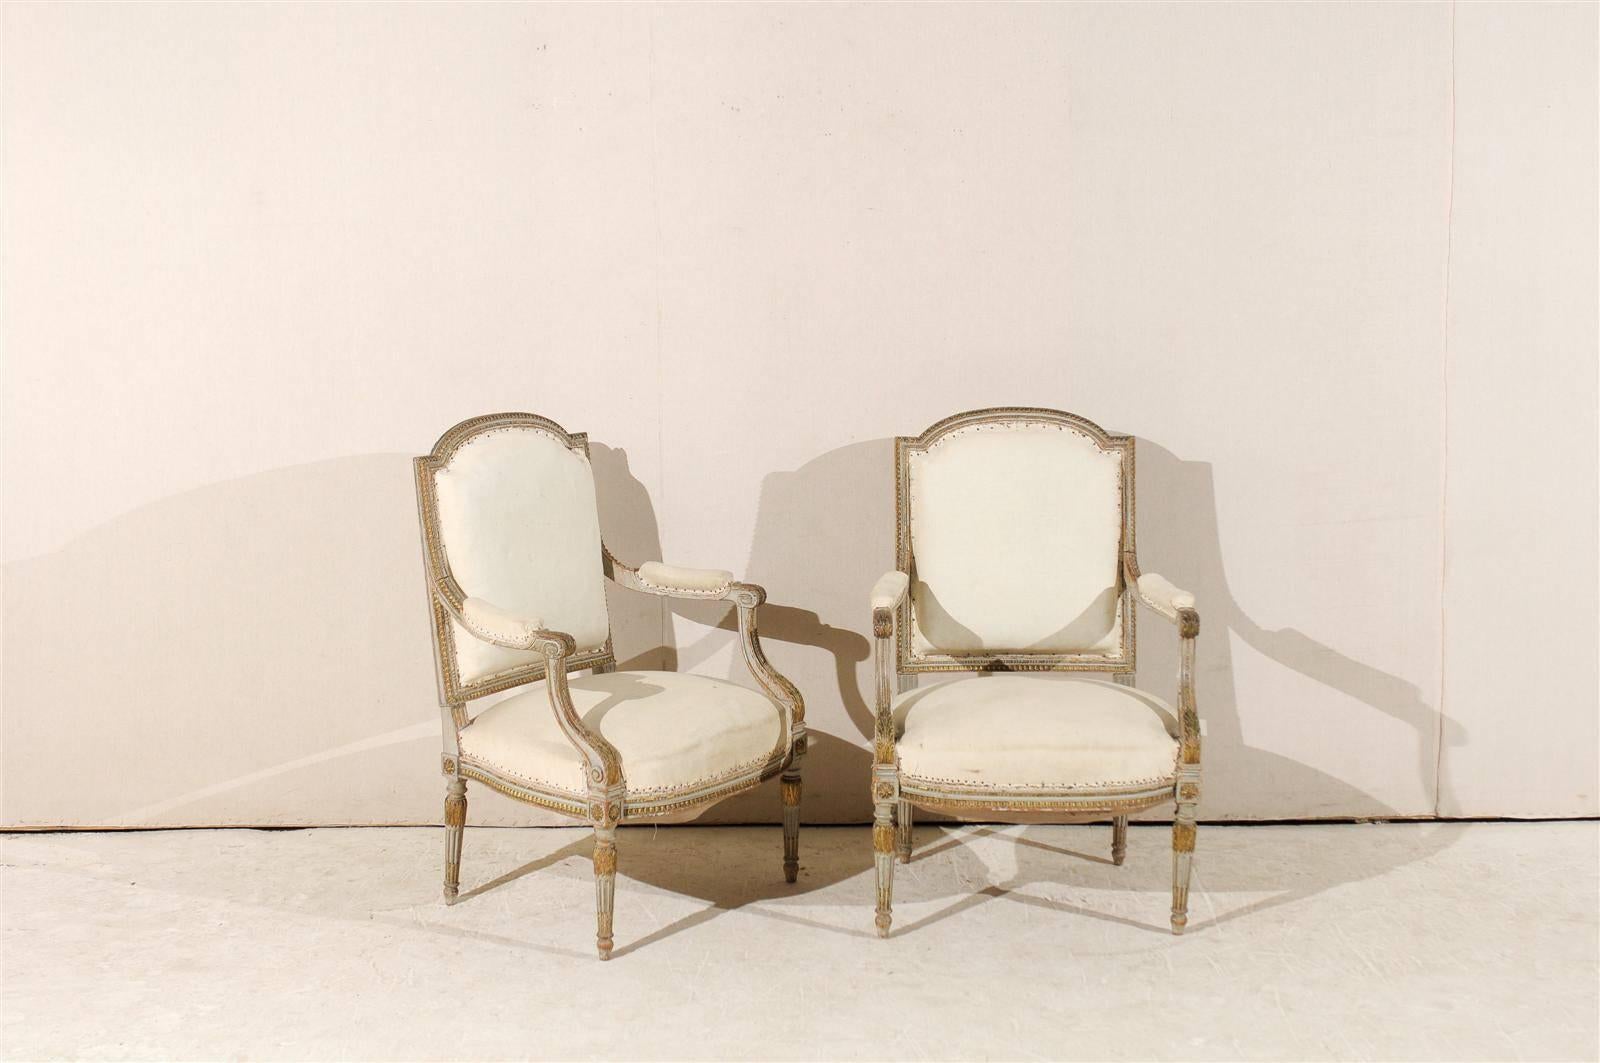 Carved Pair of 19th Century French Louis XVI Style Fauteuils or Armchairs